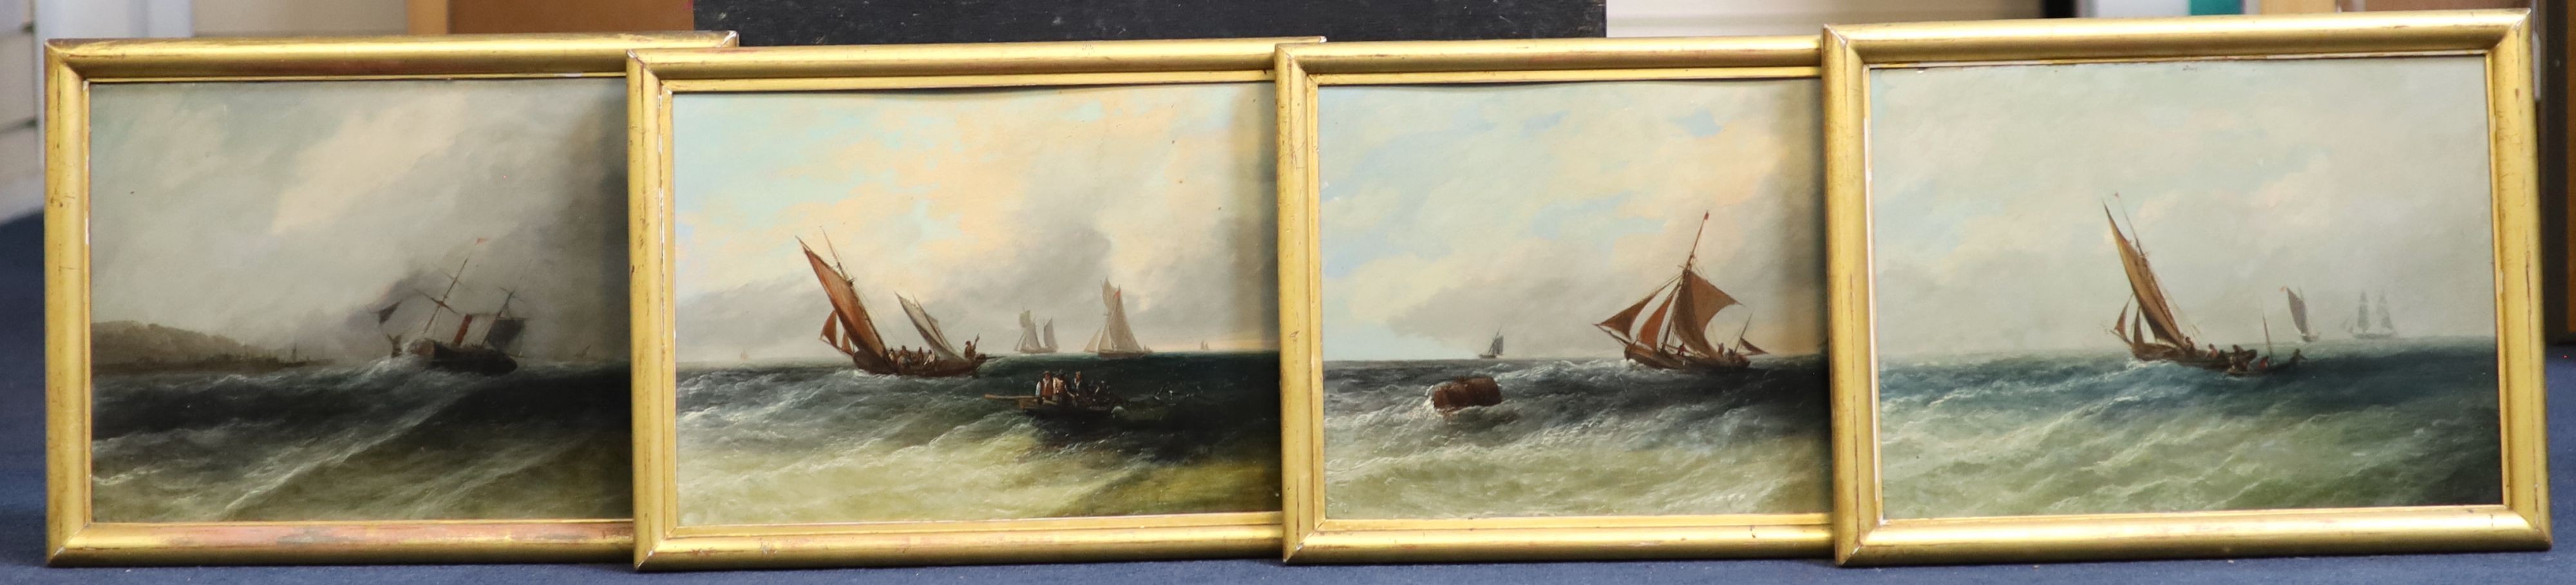 19th century English School , Fishing boats and other shipping off the coast, set of four oils on mill board, 24 x 34cm